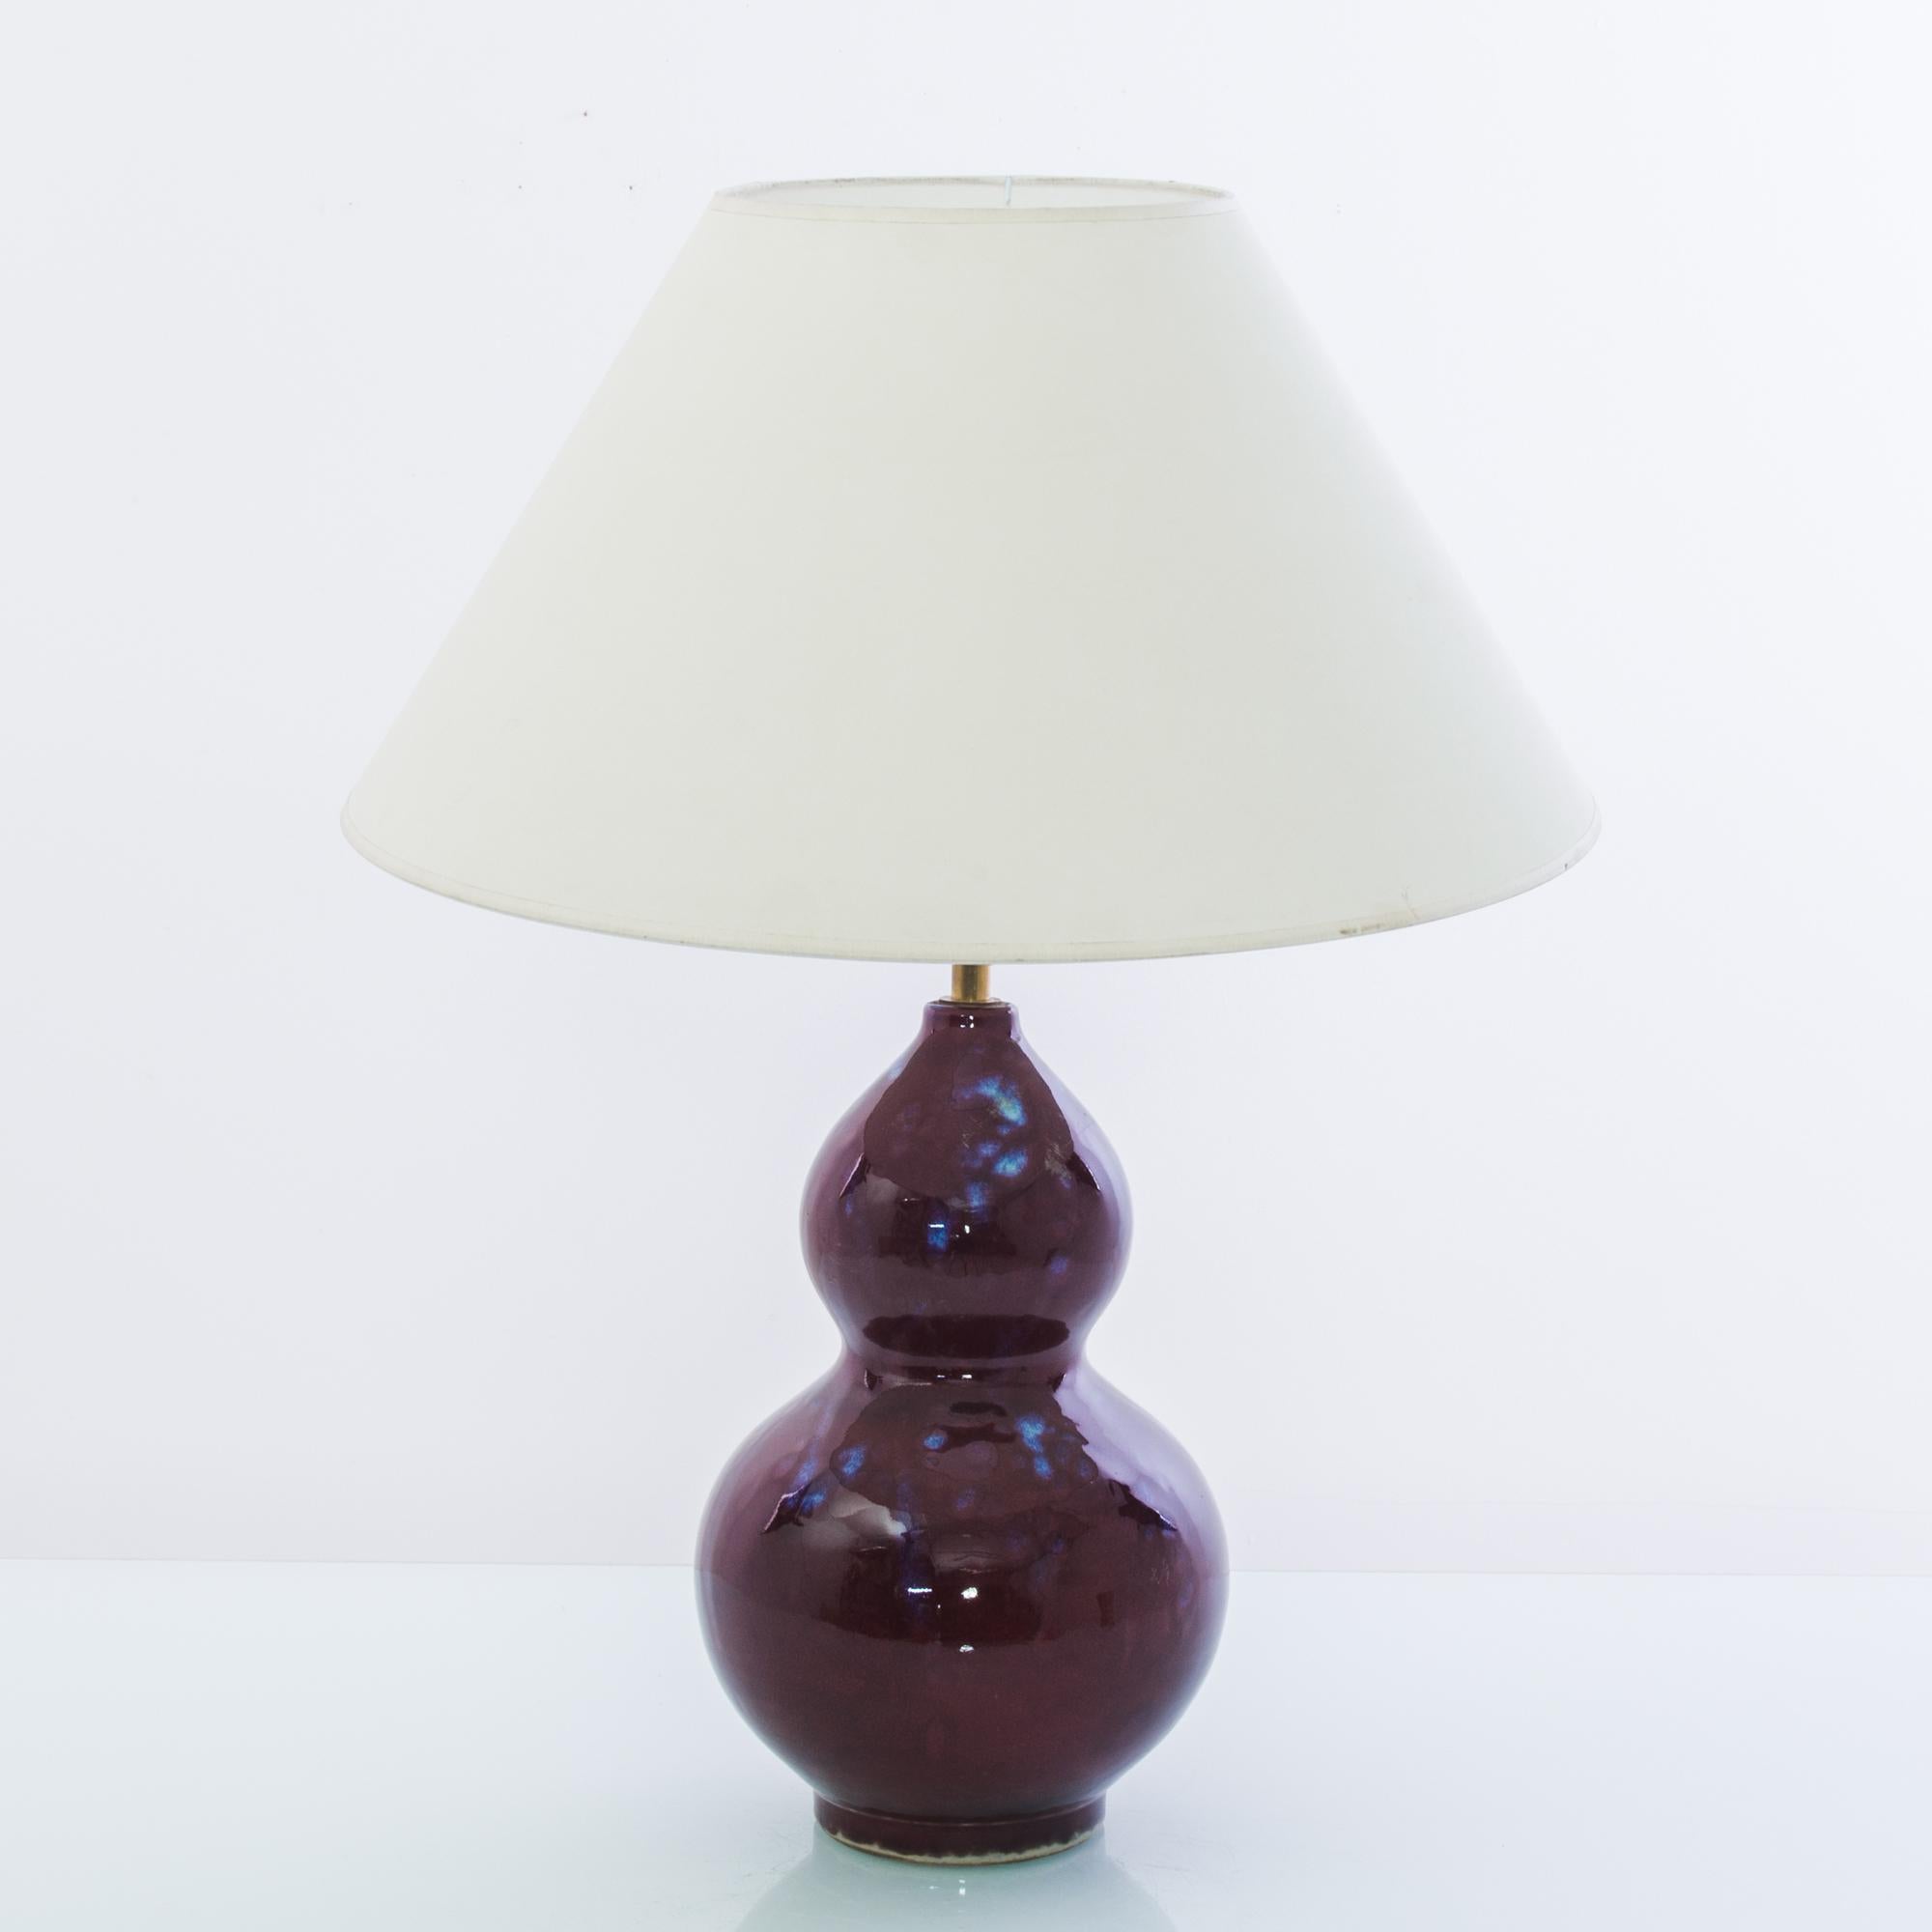 A ceramic table lamp from China. The deep tone and brilliant shine of the plum purple glaze creates a vivid visual impact; patches of brilliant lapis blue add a touch of iridescence. Smooth curves grant a sensuous tactility to the form. Crowned with